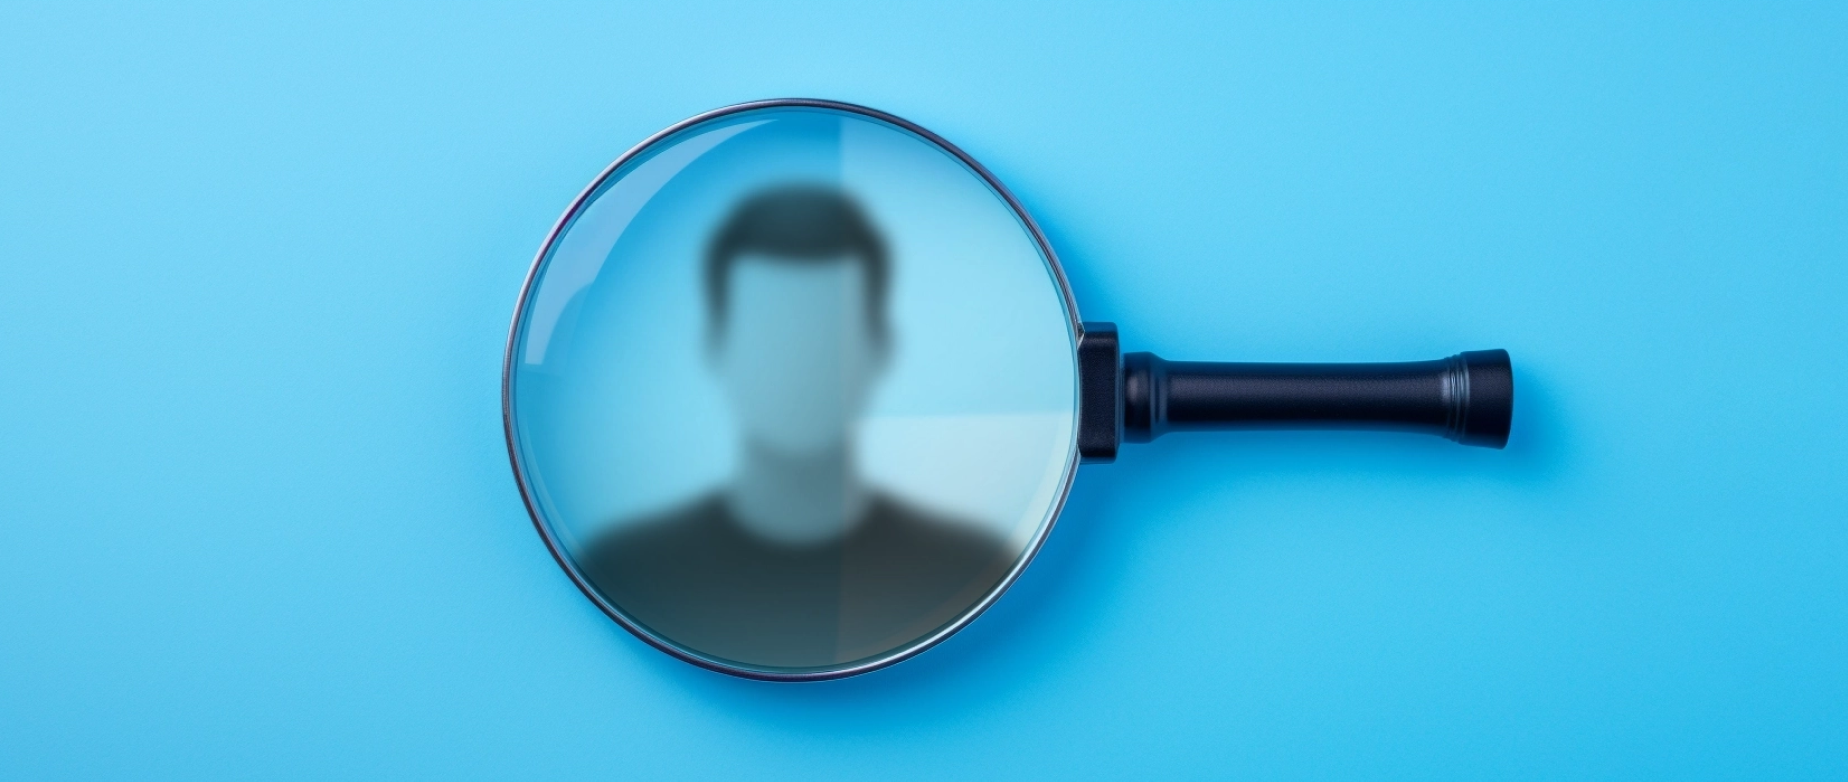 A magnifying glass examining a profile icon on a blue background.